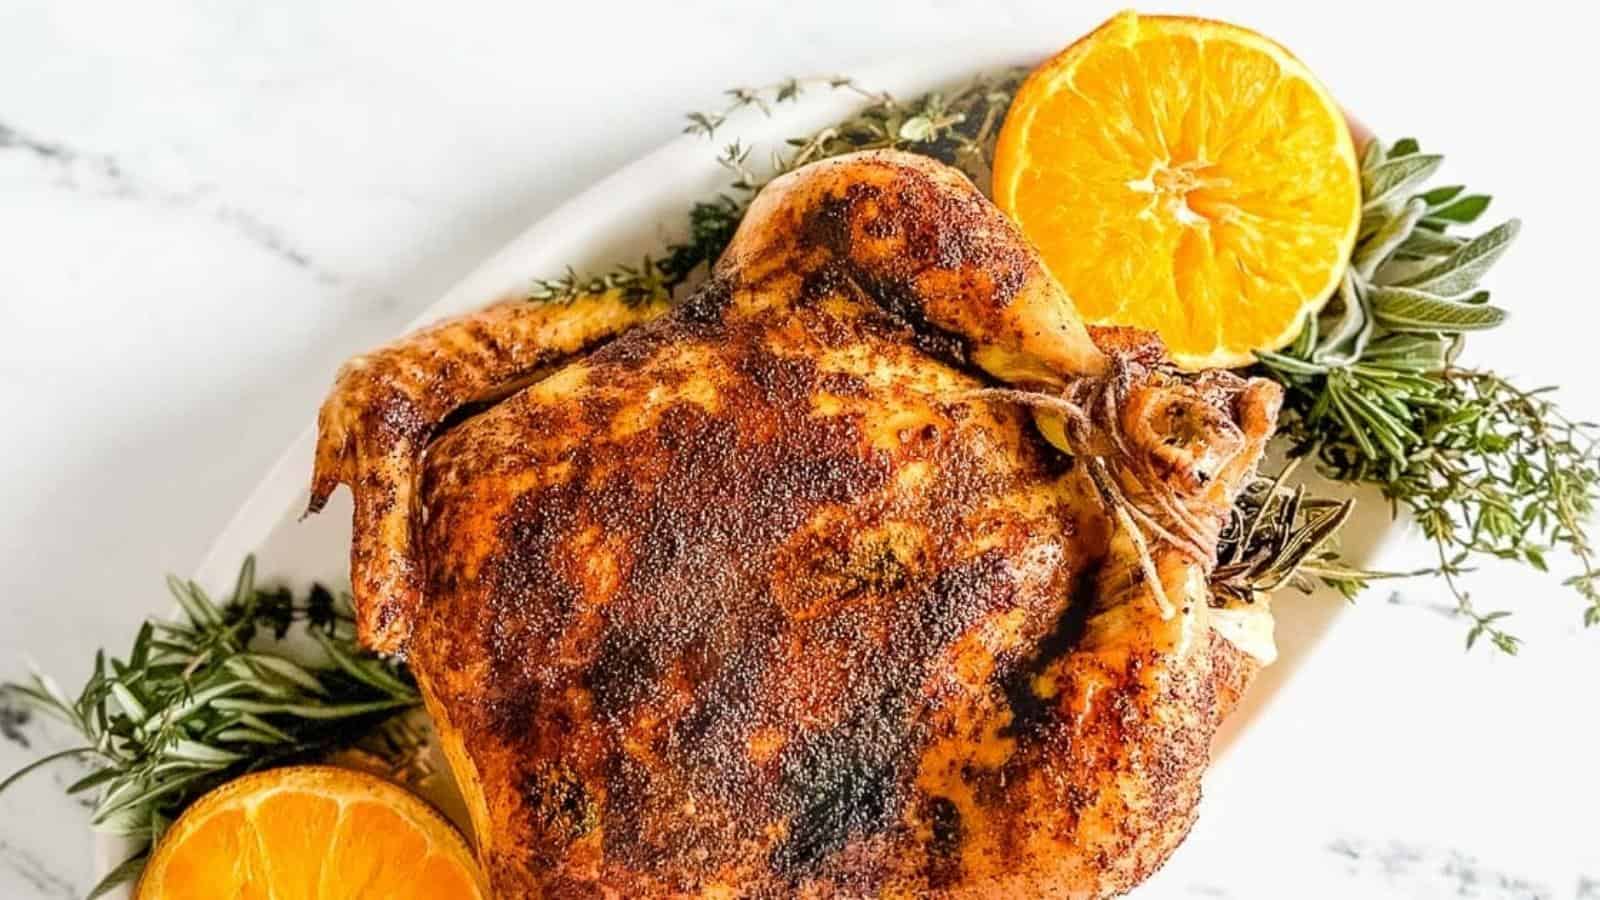 Roast chicken with orange butter on a white platter with thyme, sage, rosemary, and halved oranges.